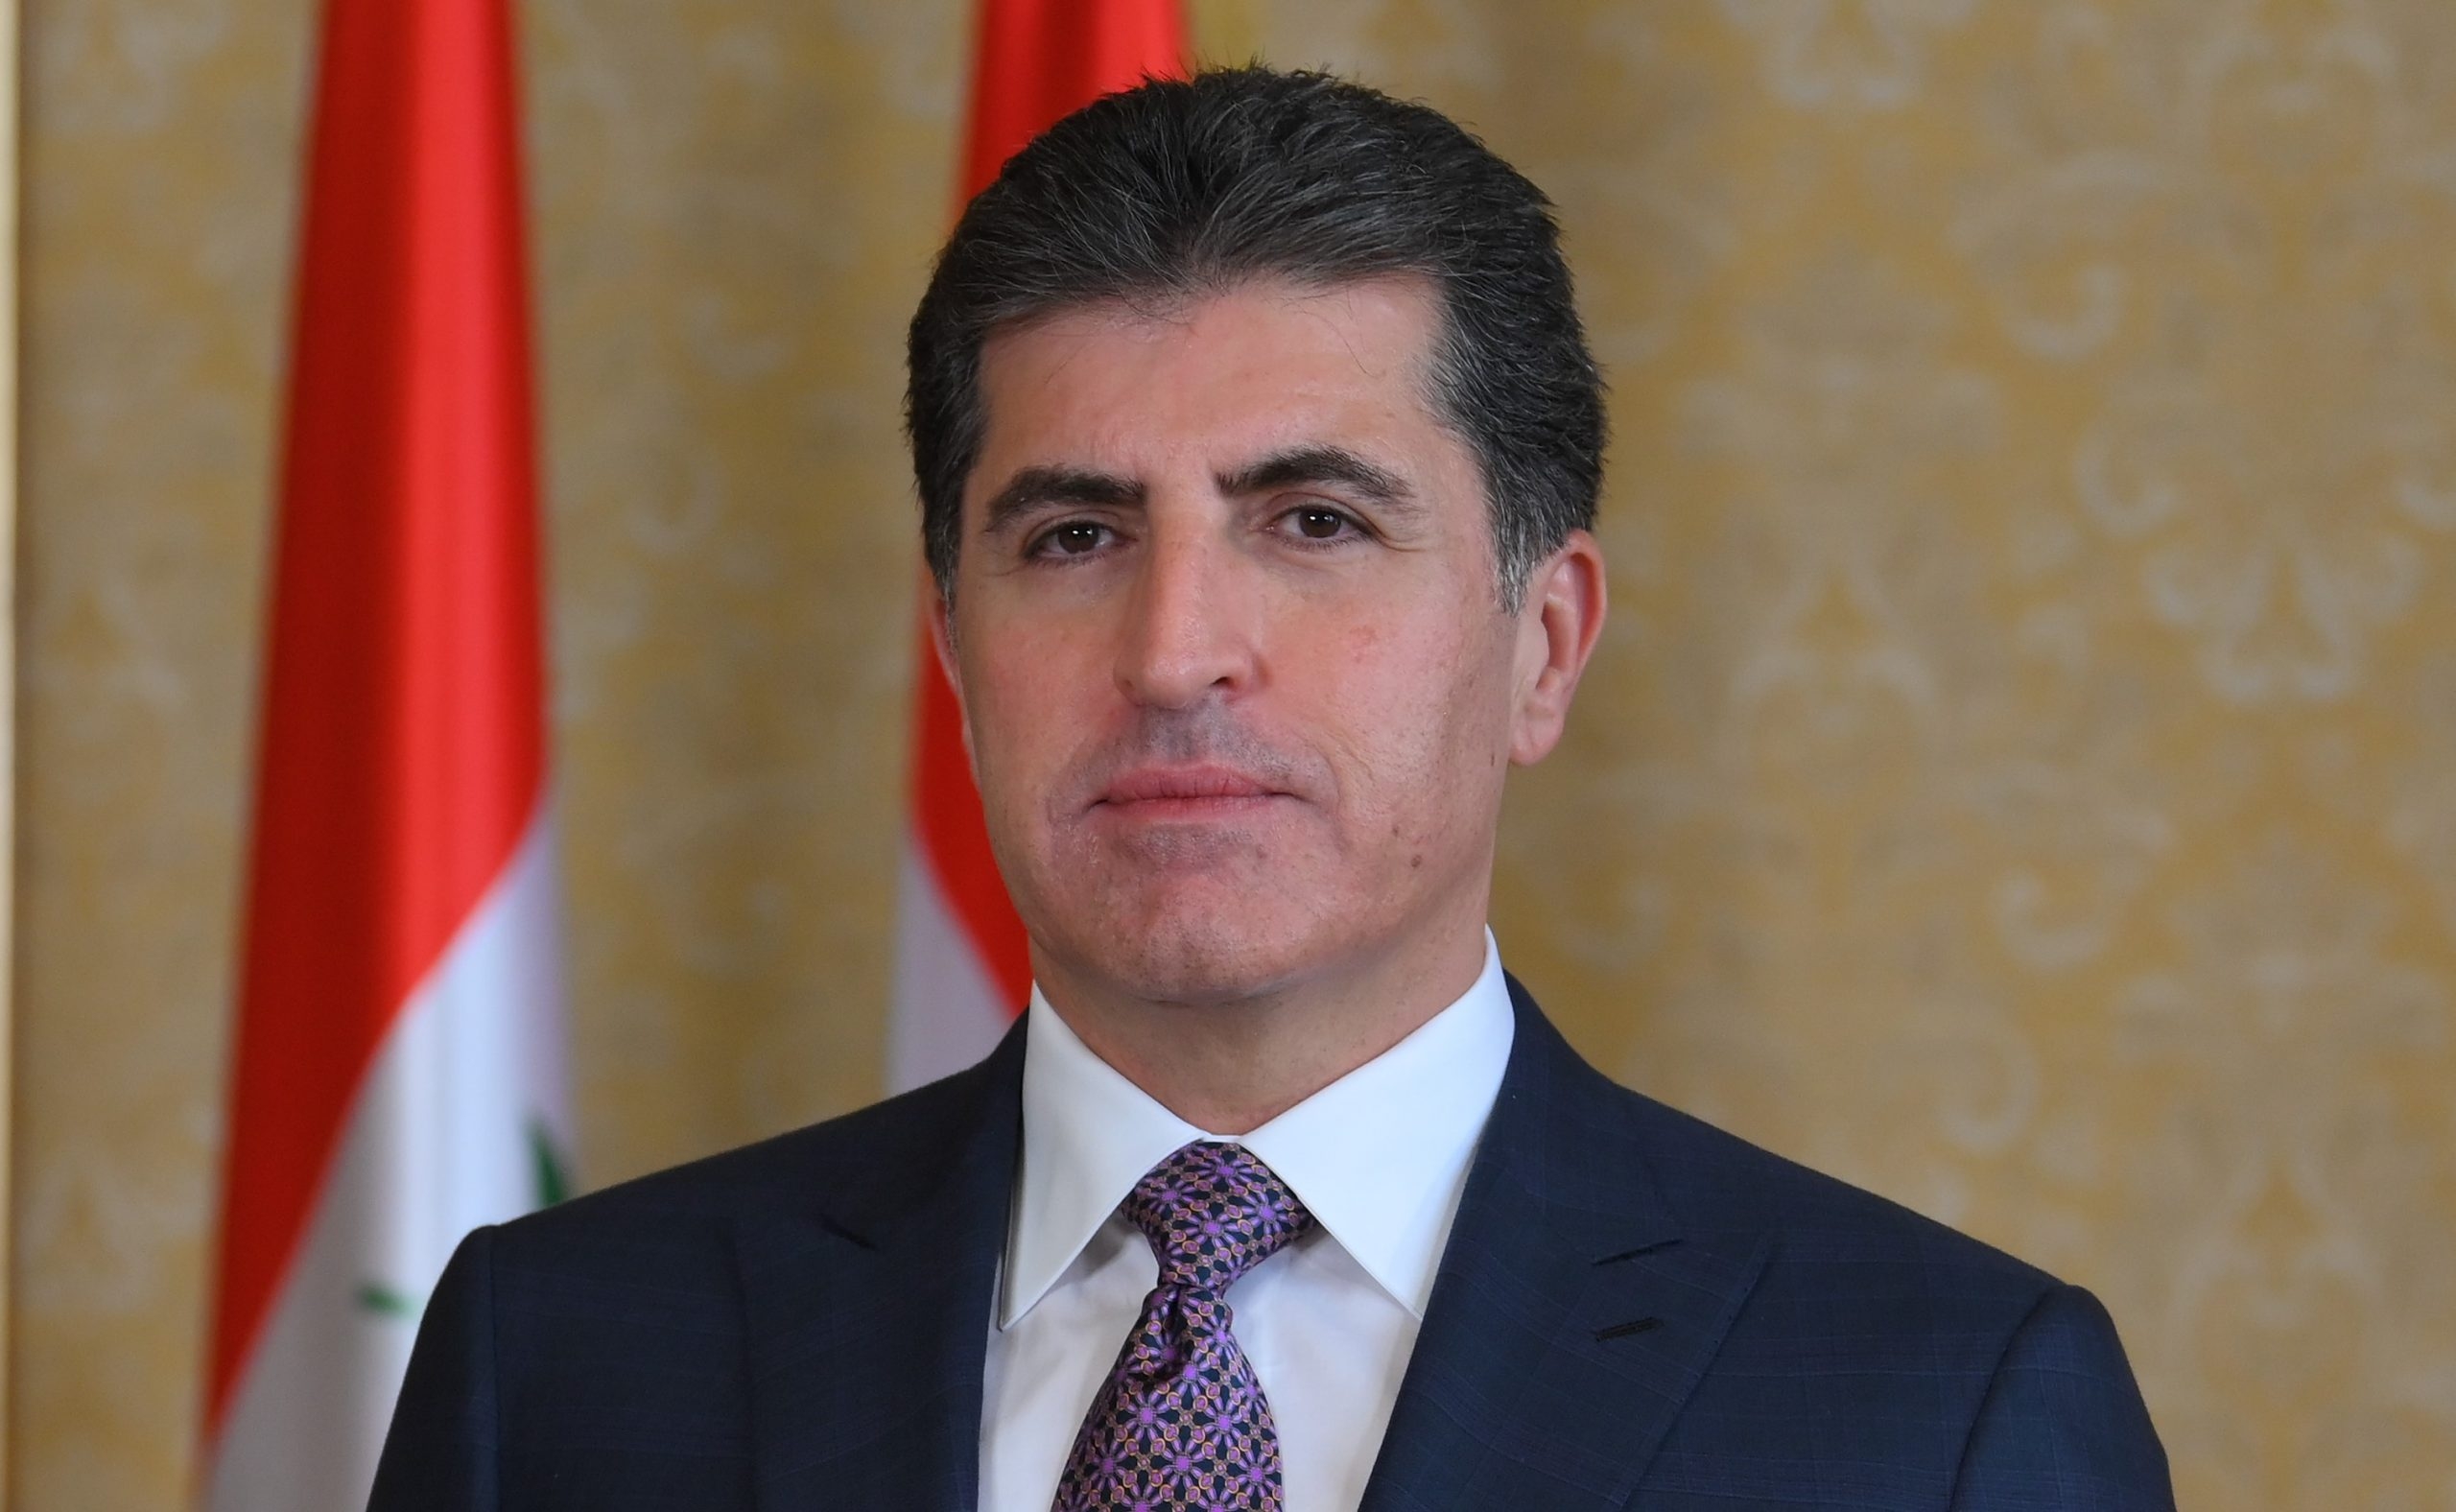 President Nechirvan Barzani offers condolences to victims of gas explosion in Dohuk